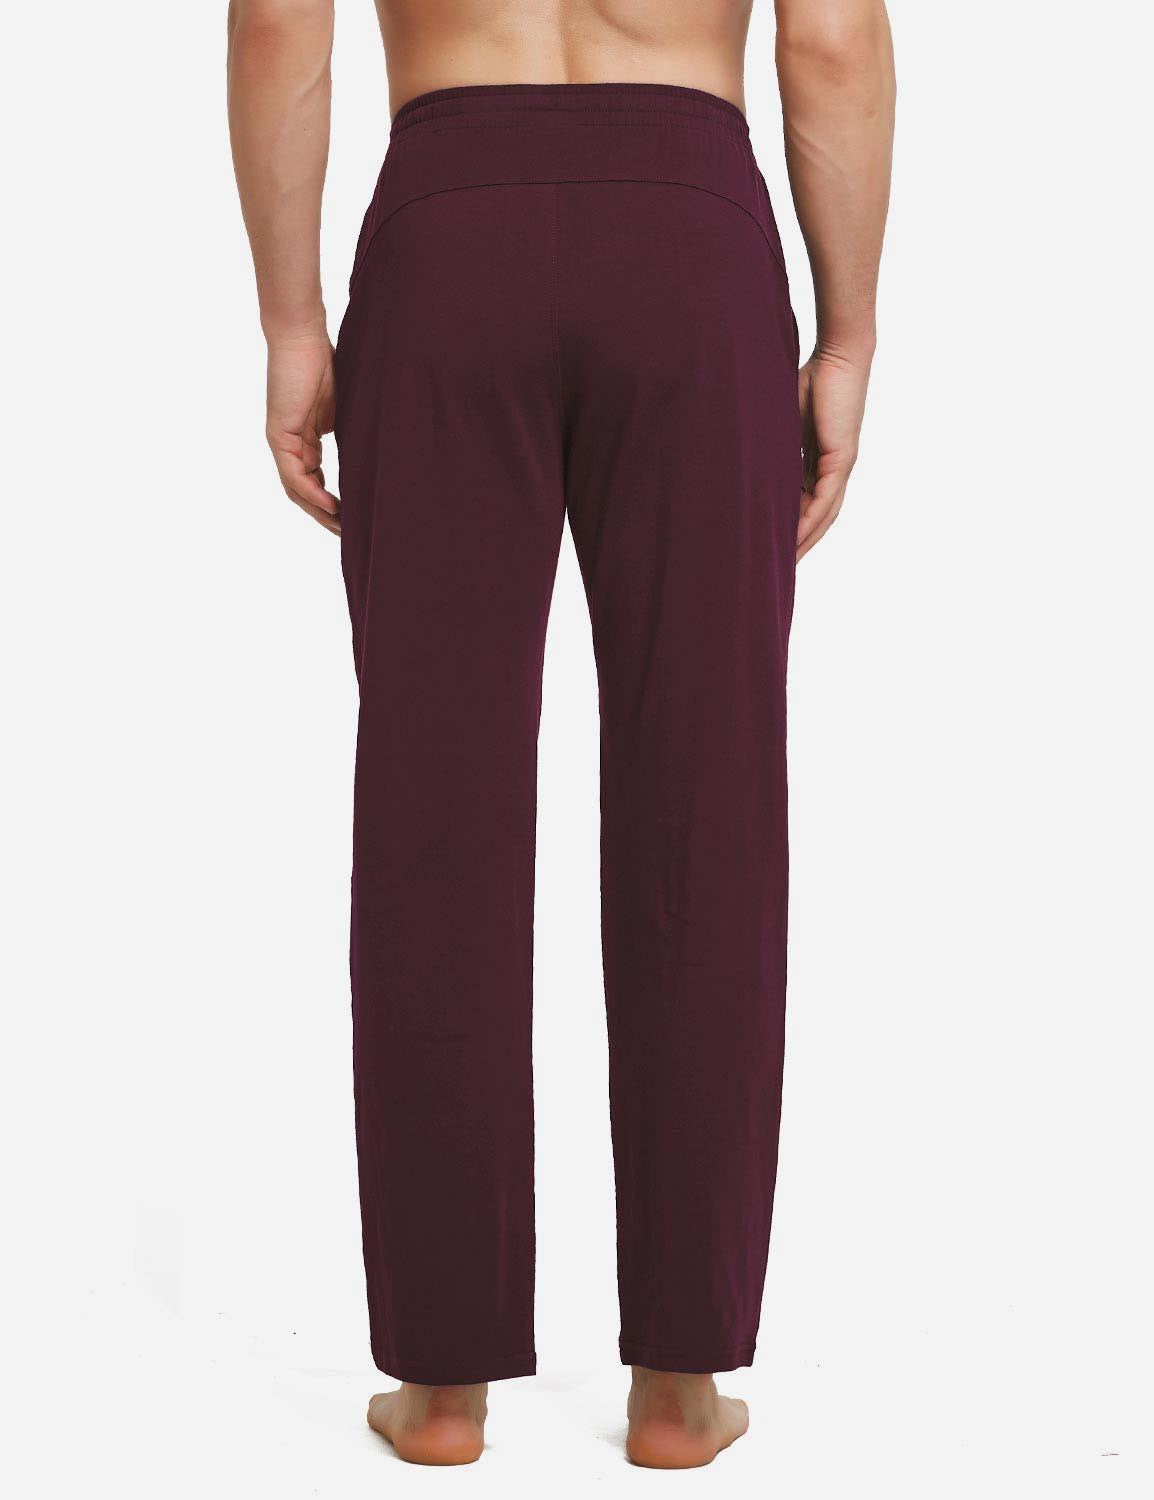 Baleaf Mens Elastic Waistband Loose Fit Side Pocketed Jogger Pants abh146 Wine Red Back